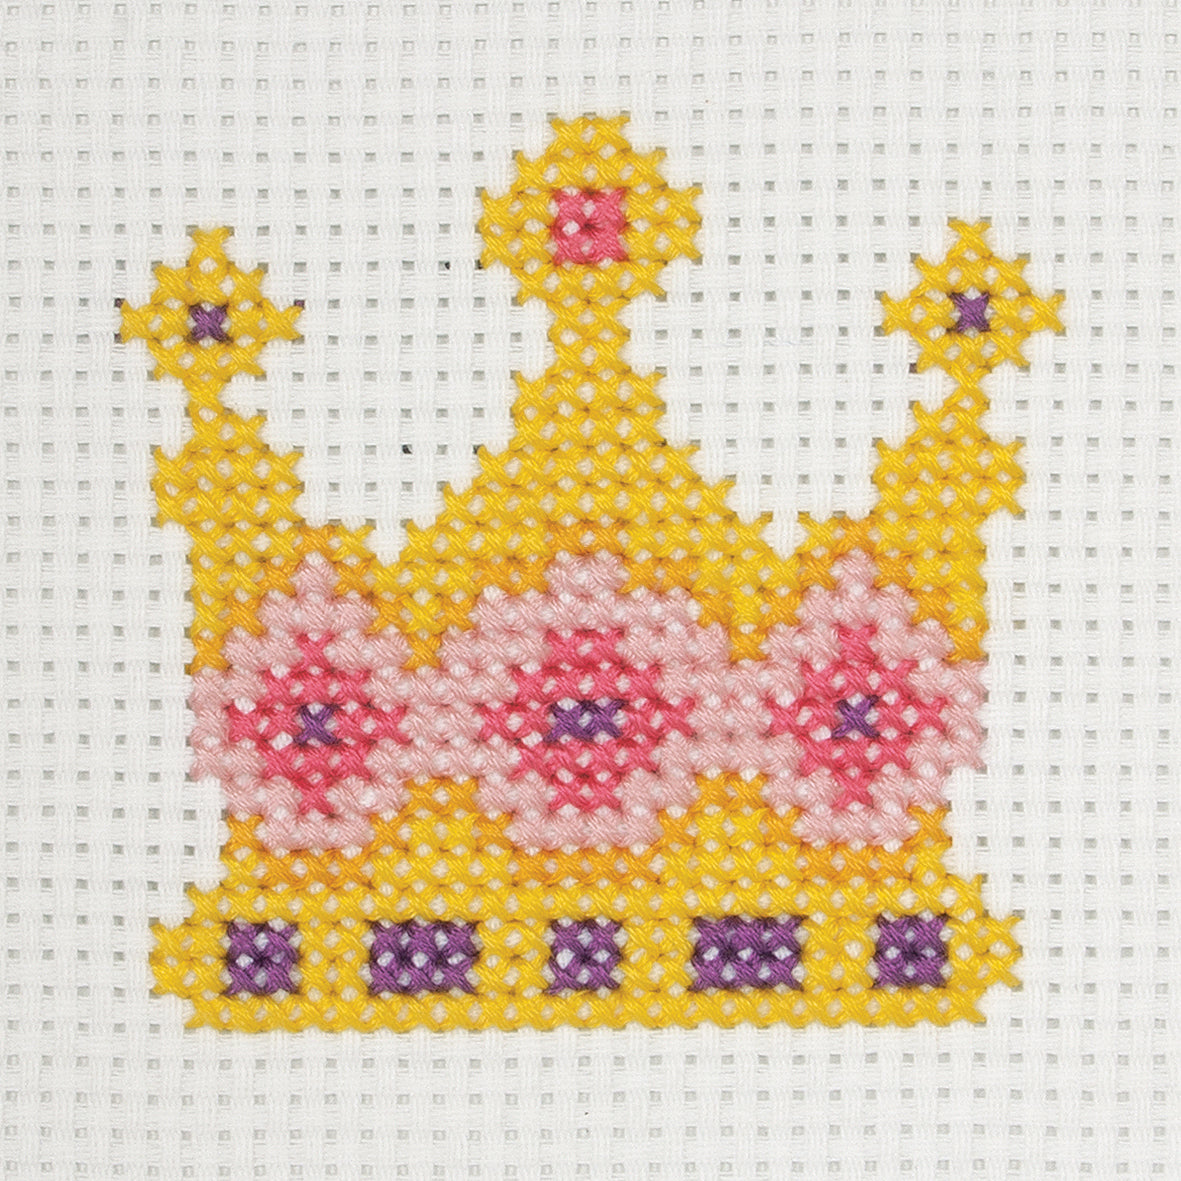 1st KIT - COUNTED CROSS STITCH - CROWN